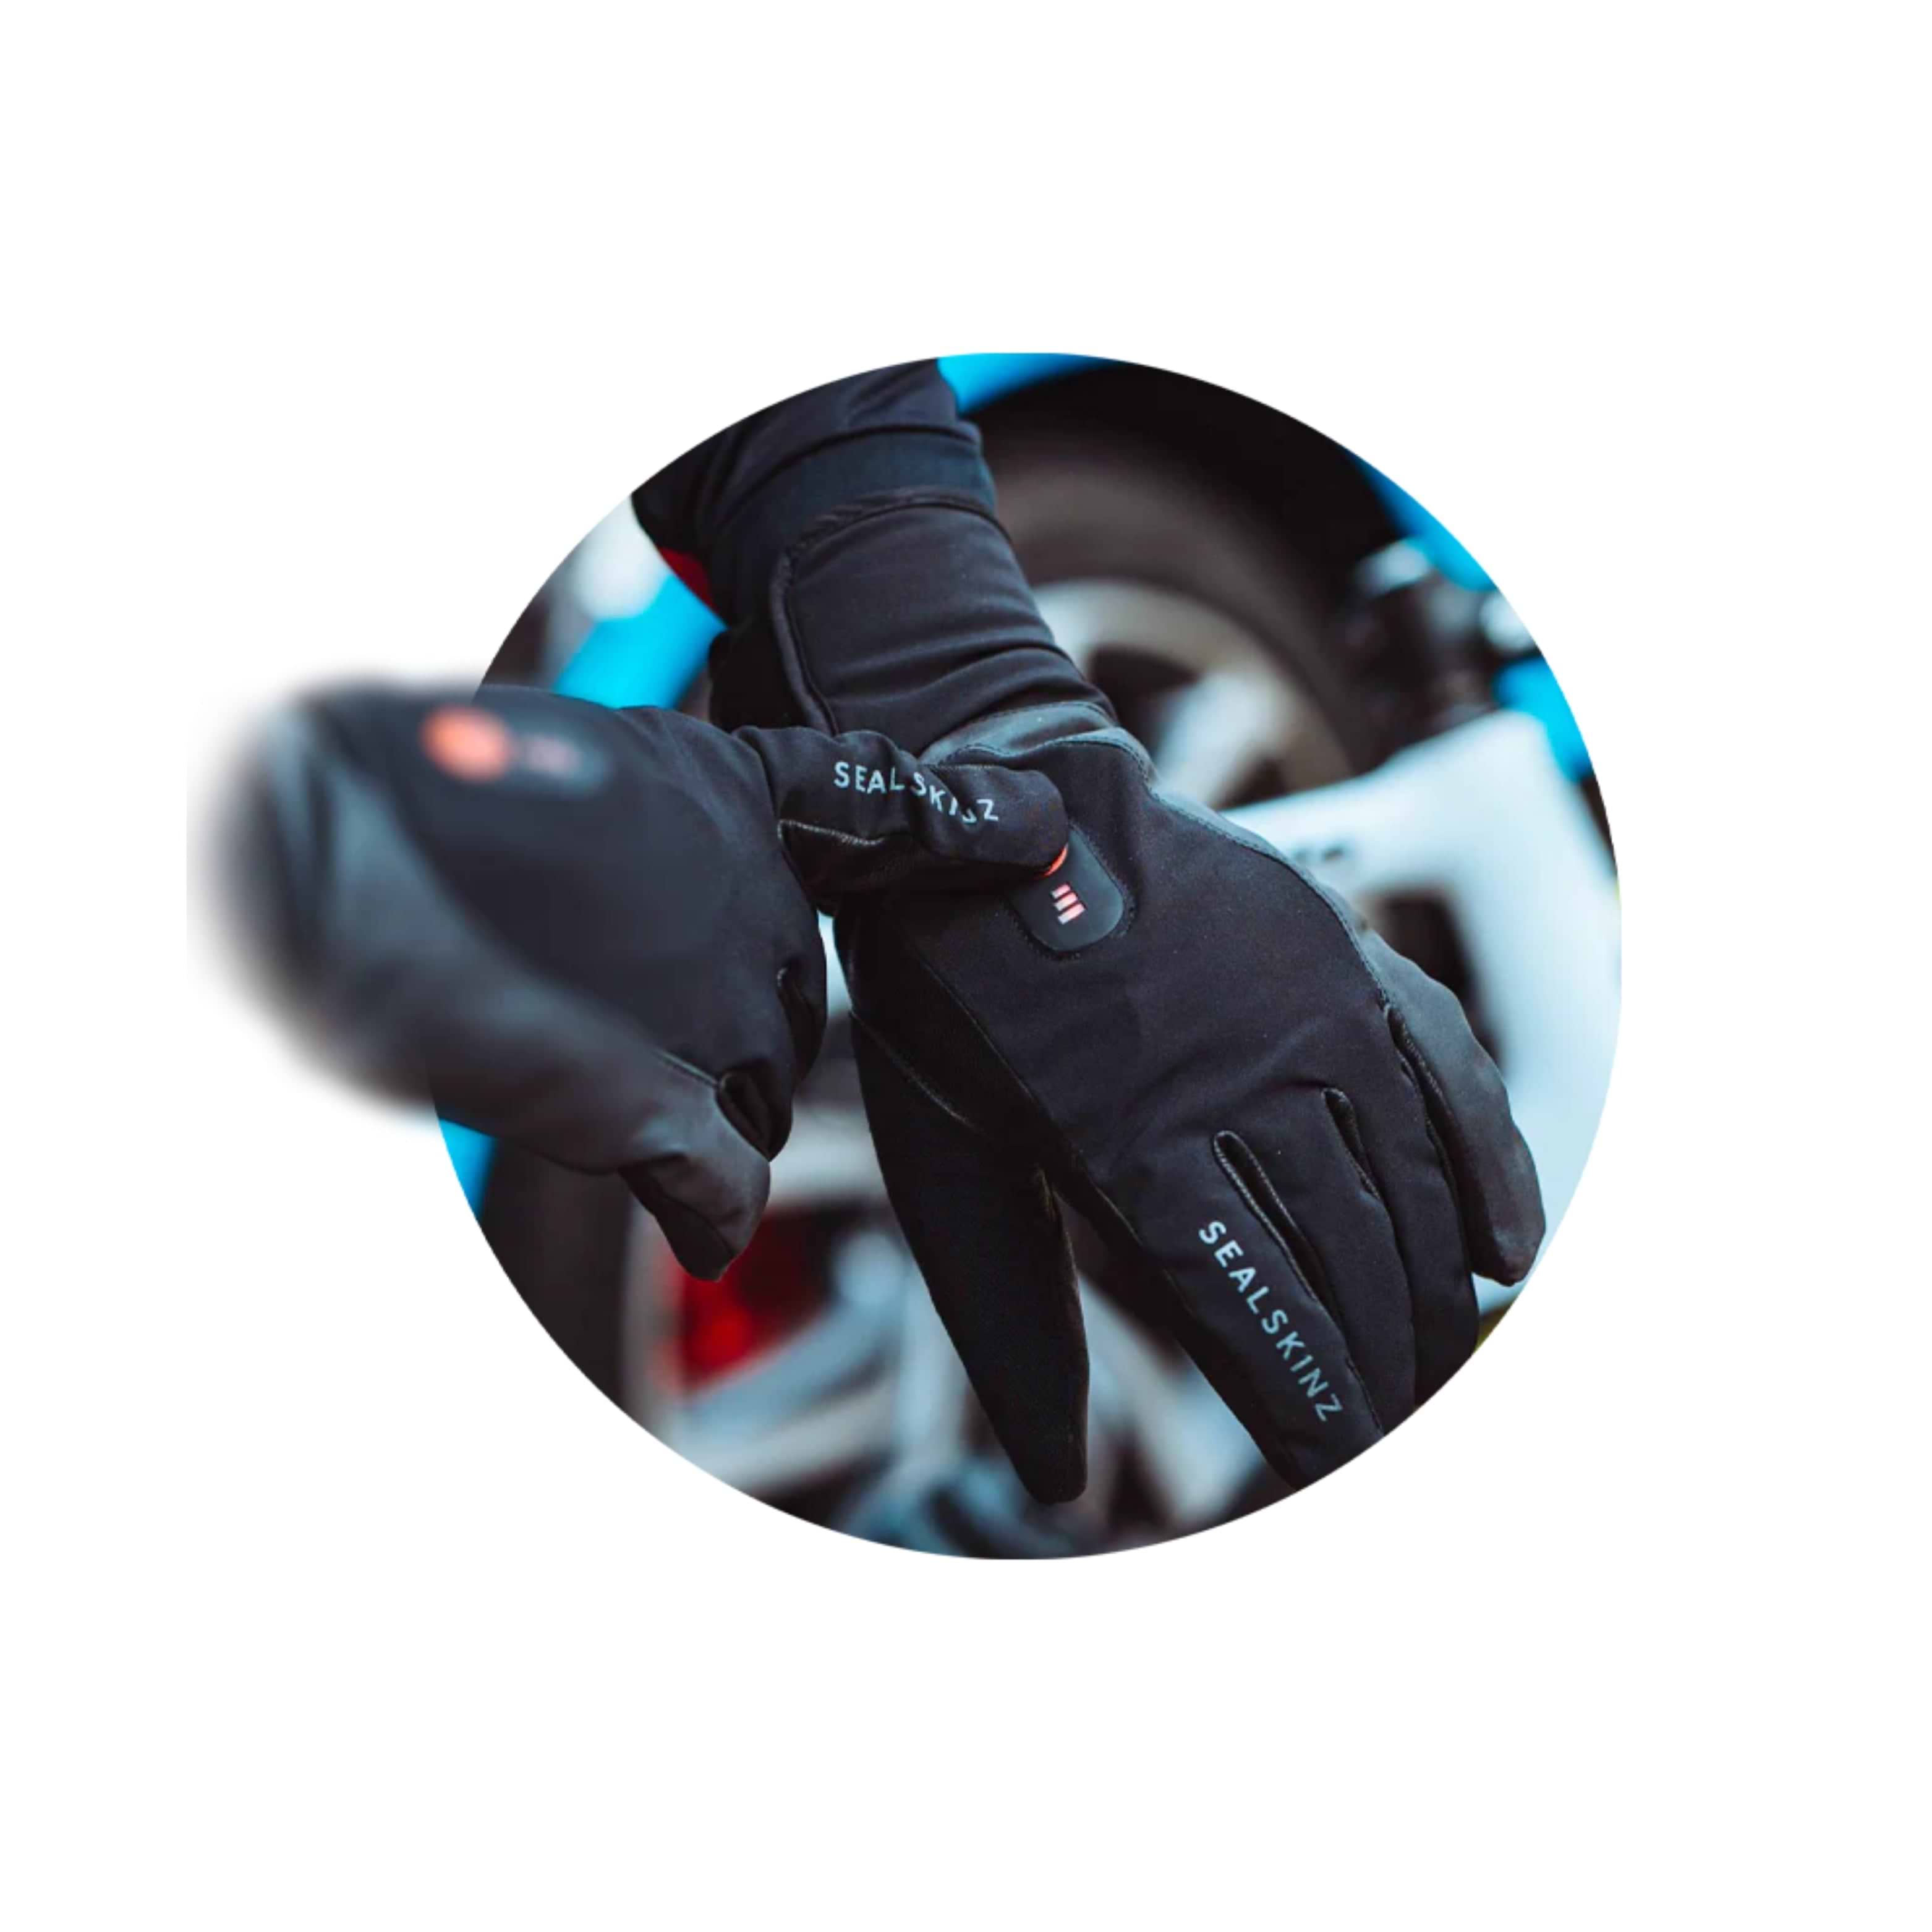 Winter Fishing Gloves Leak Two Fingers Sports TouchScreen Warm Padded  Gloves Waterproof Cycling Gloves for Men and Women Q230825